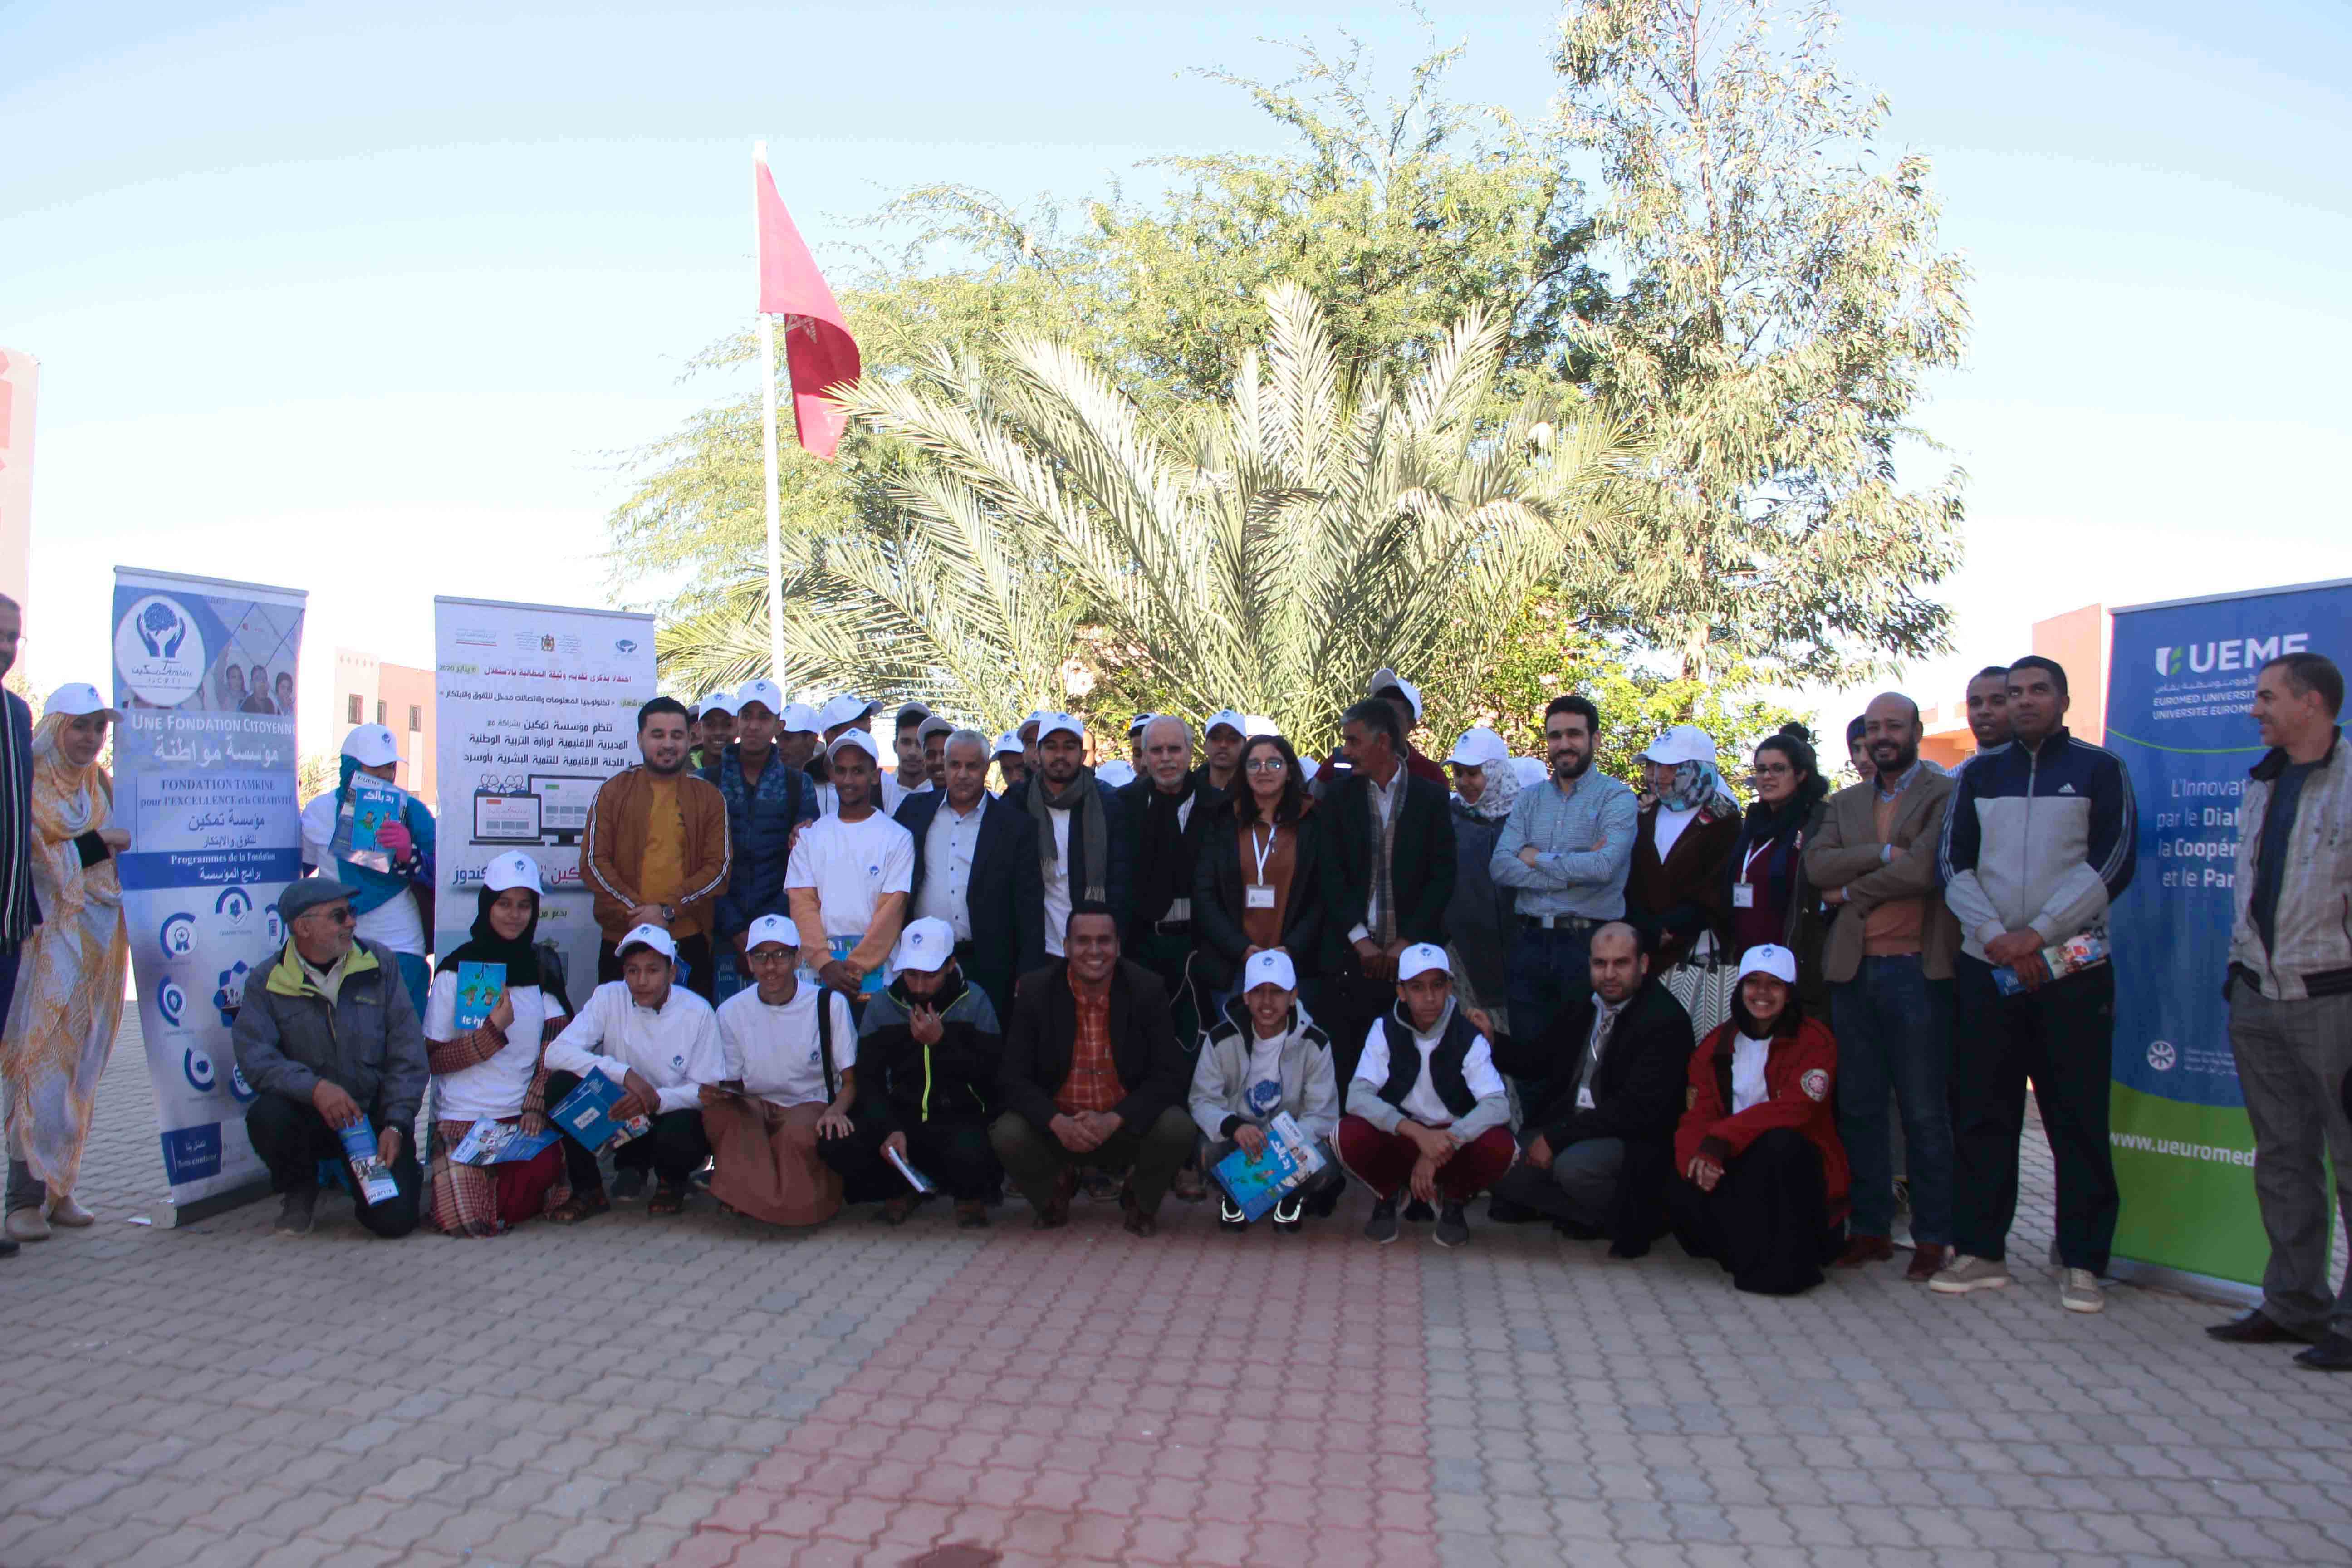 Participation of the Euromed University of Fez in the Tamkine caravan of the Dakhla-Oued Ed-Dahab region